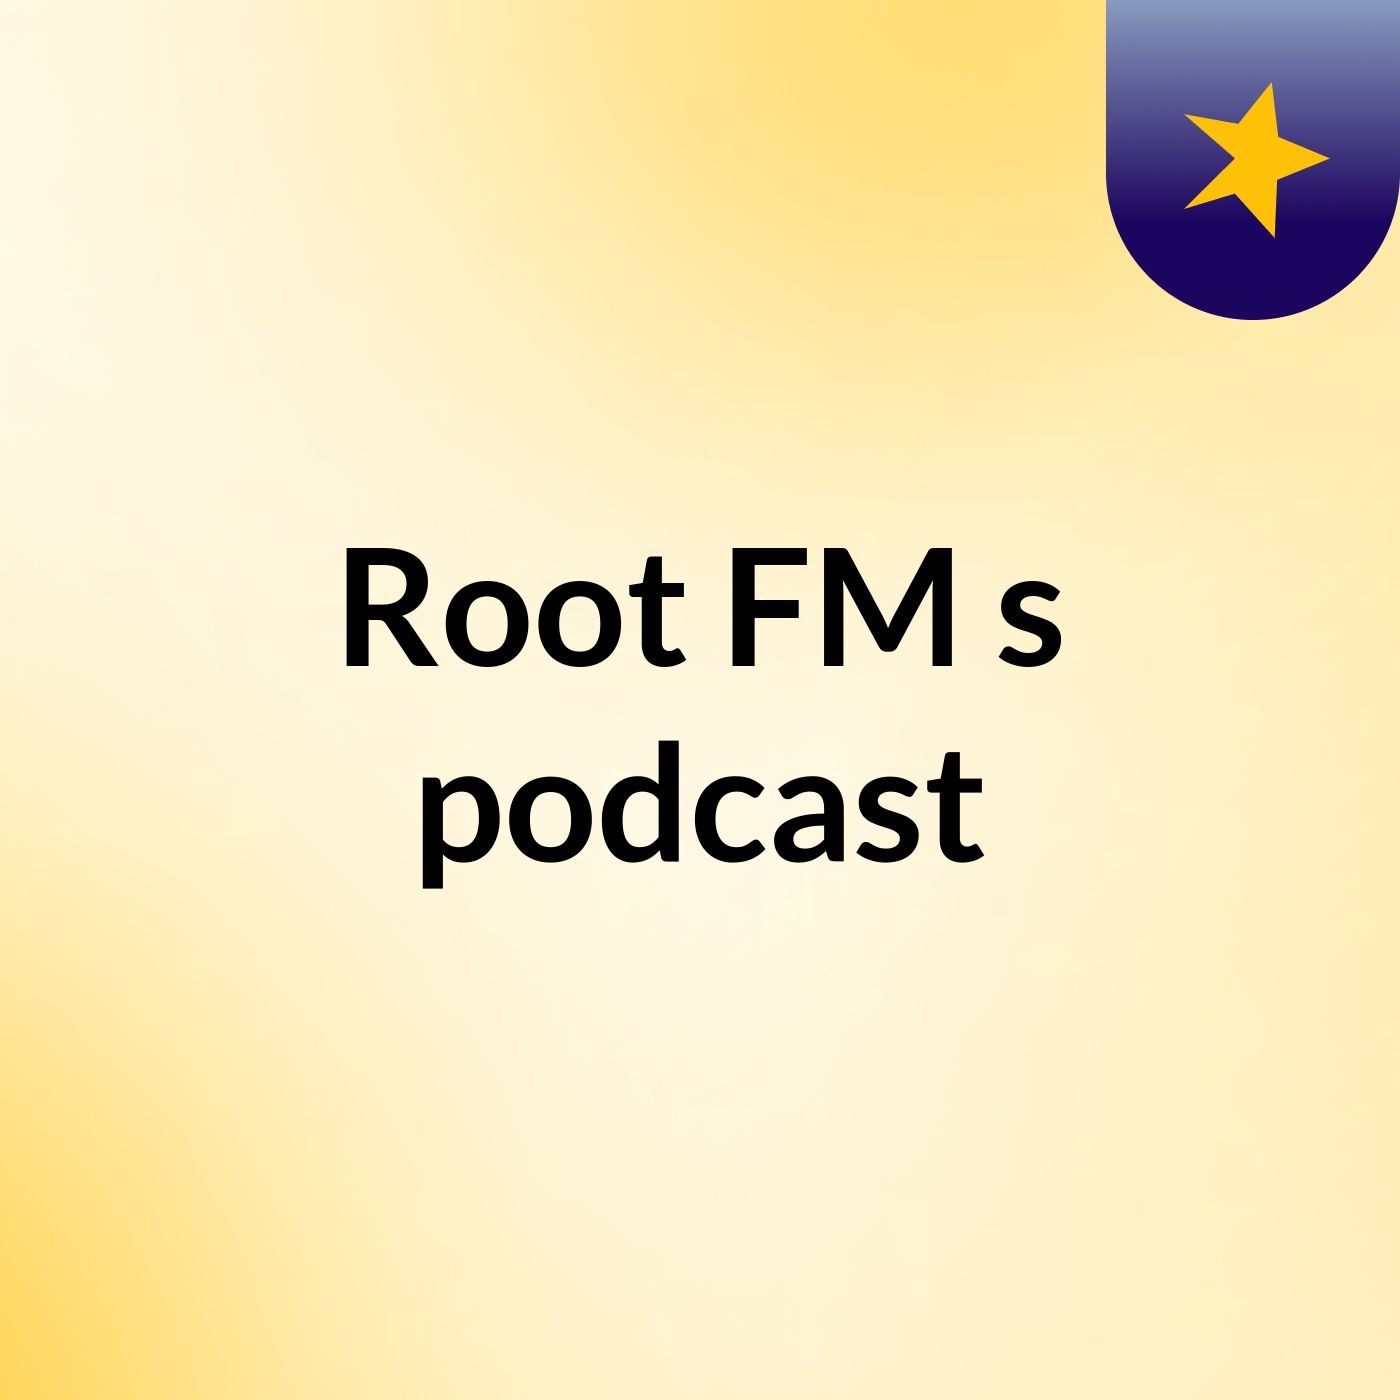 Episode 6 - Root FM's podcast